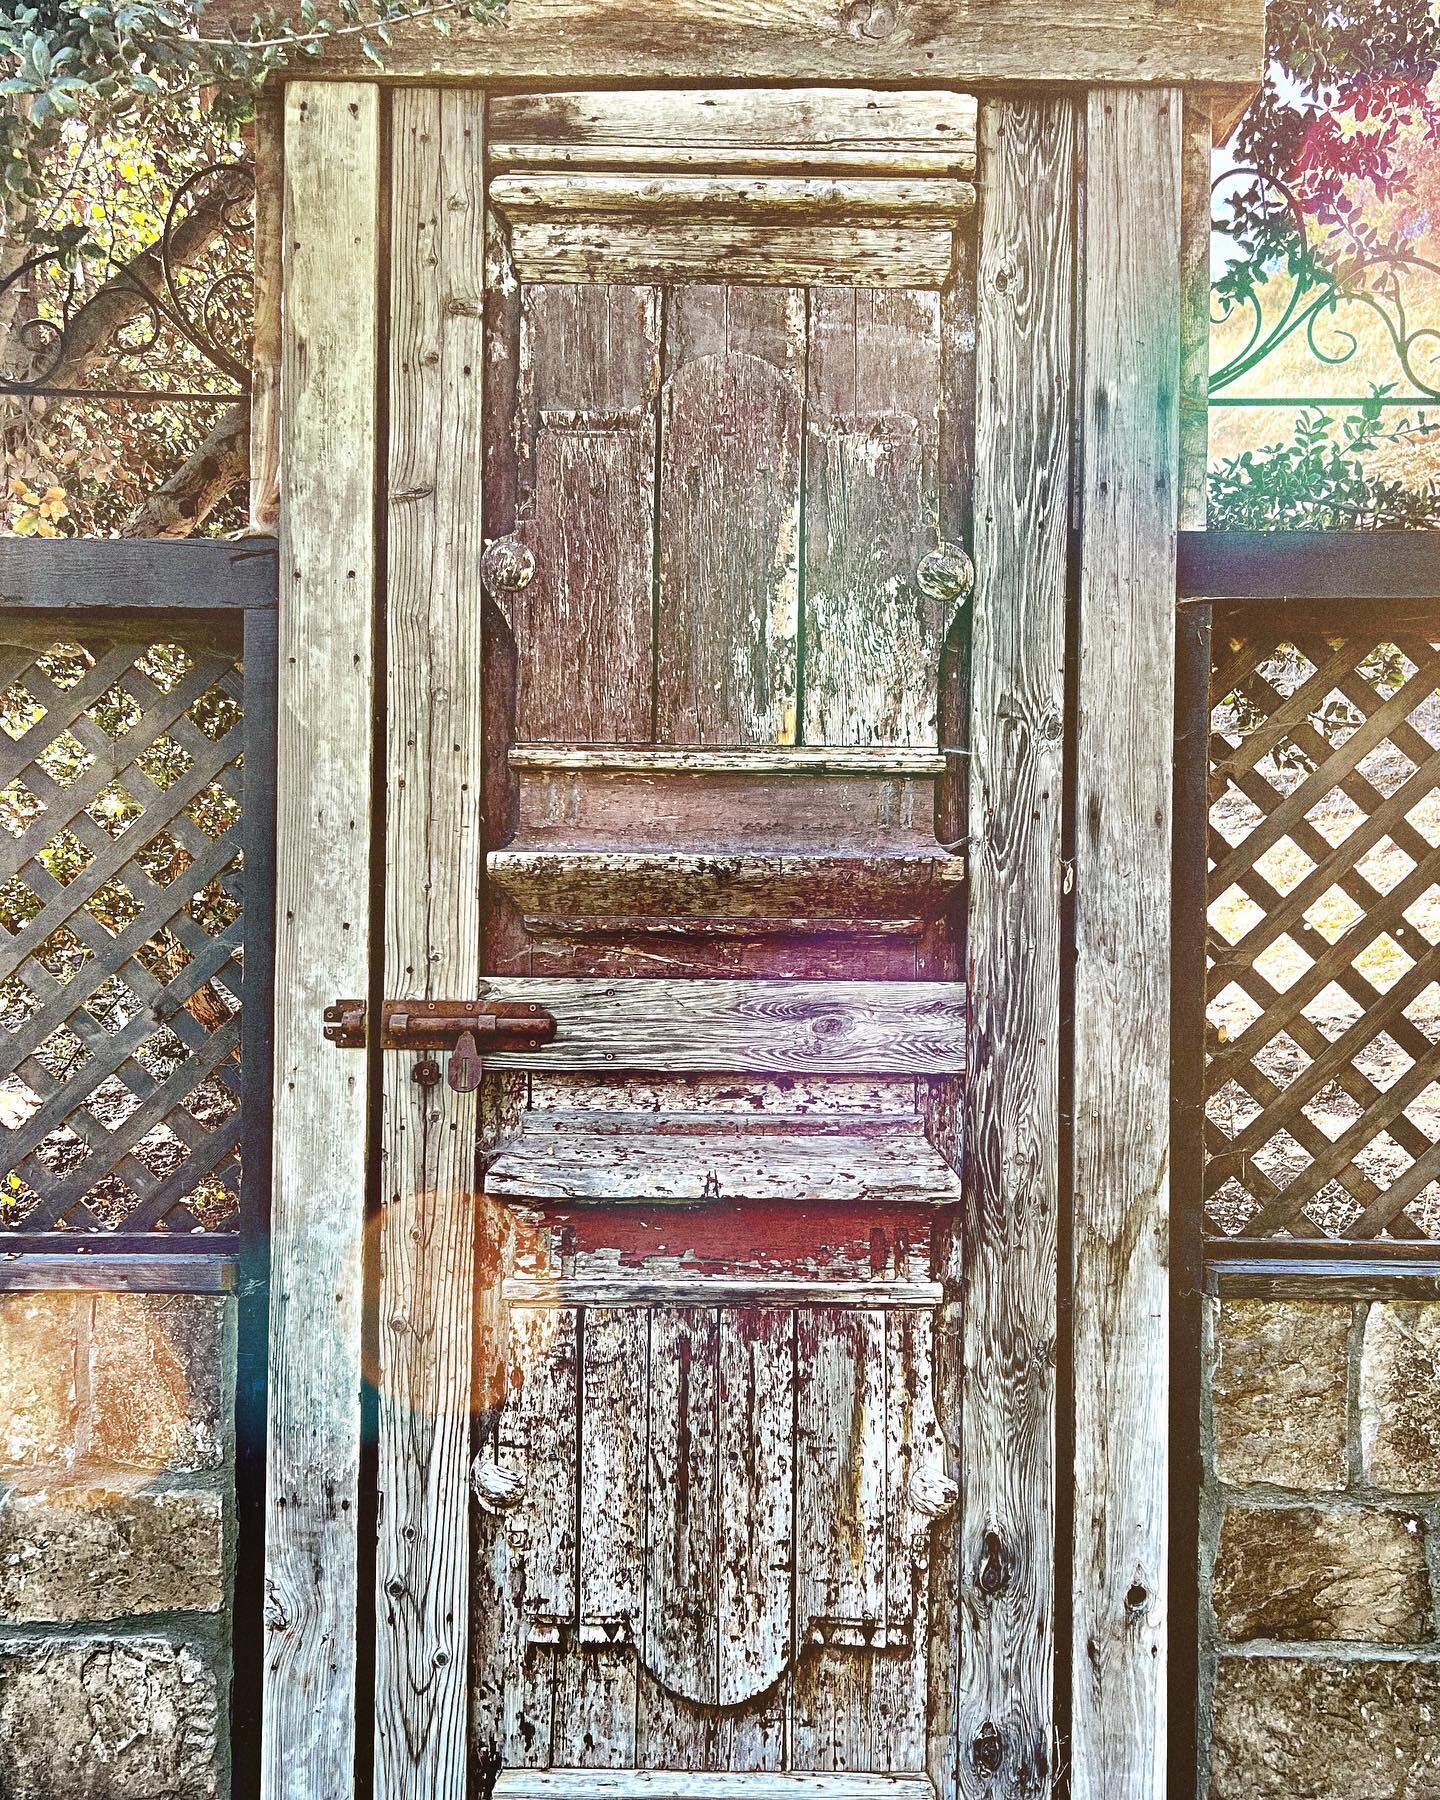 Rustic doorways are our favorite places to greet new visitors old friends alike! Happy hour starts at 4&hellip; see you soon!